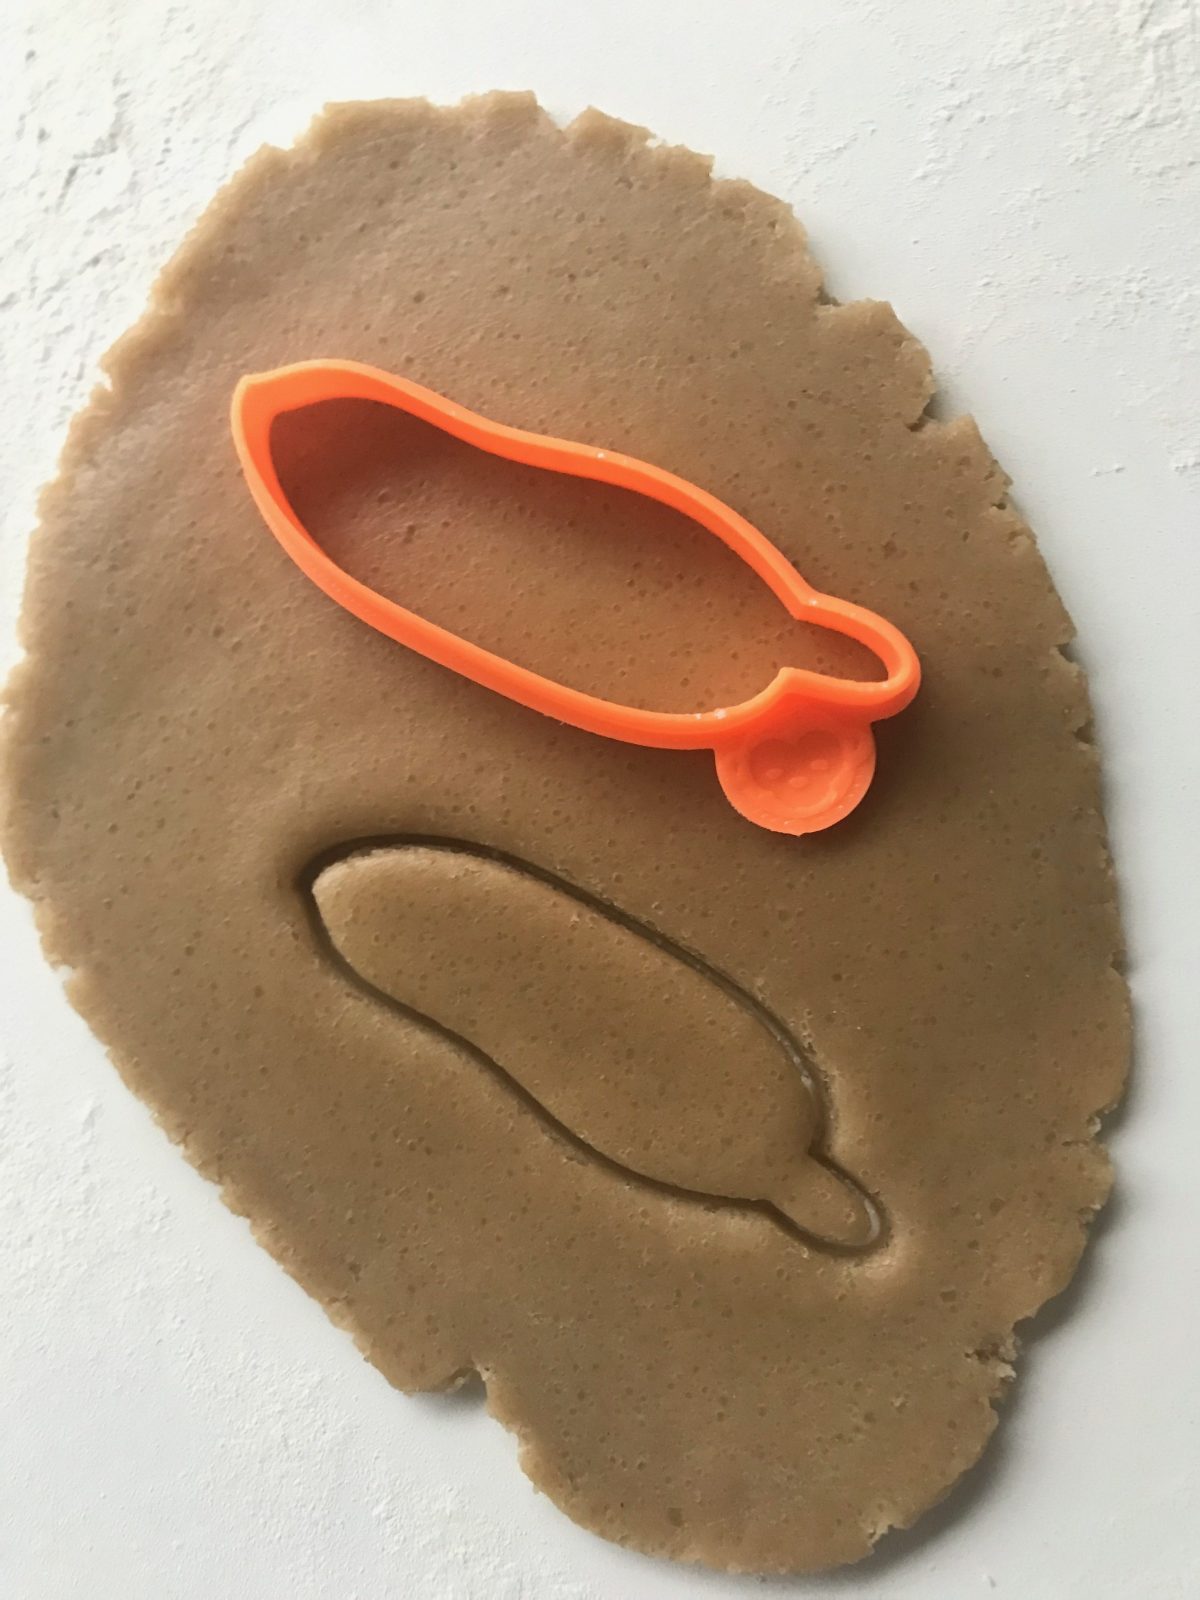 orange feather outline cookie cutter on dough